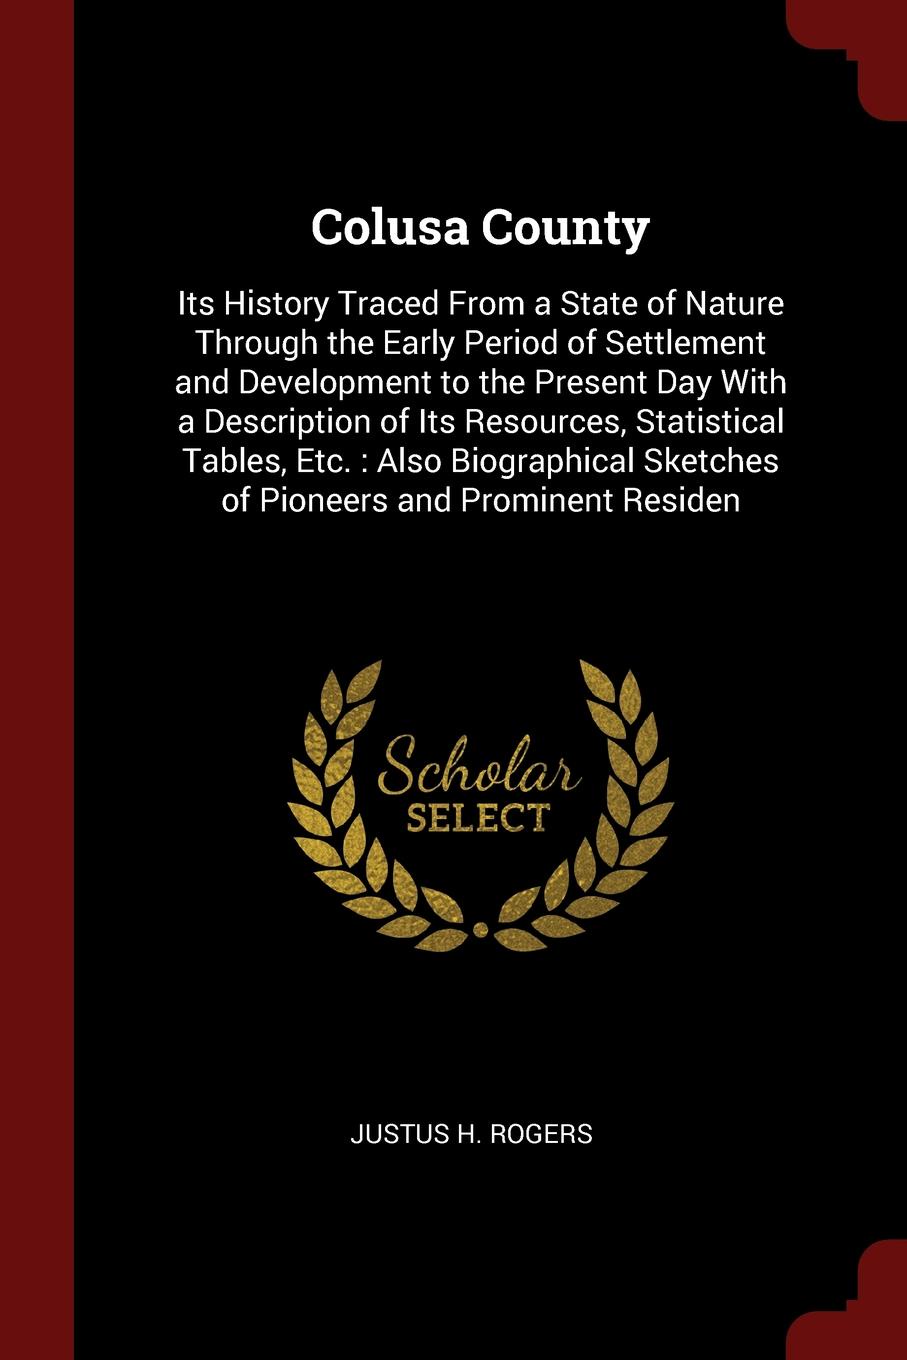 Colusa County. Its History Traced From a State of Nature Through the Early Period of Settlement and Development to the Present Day With a Description of Its Resources, Statistical Tables, Etc. : Also Biographical Sketches of Pioneers and Prominent...